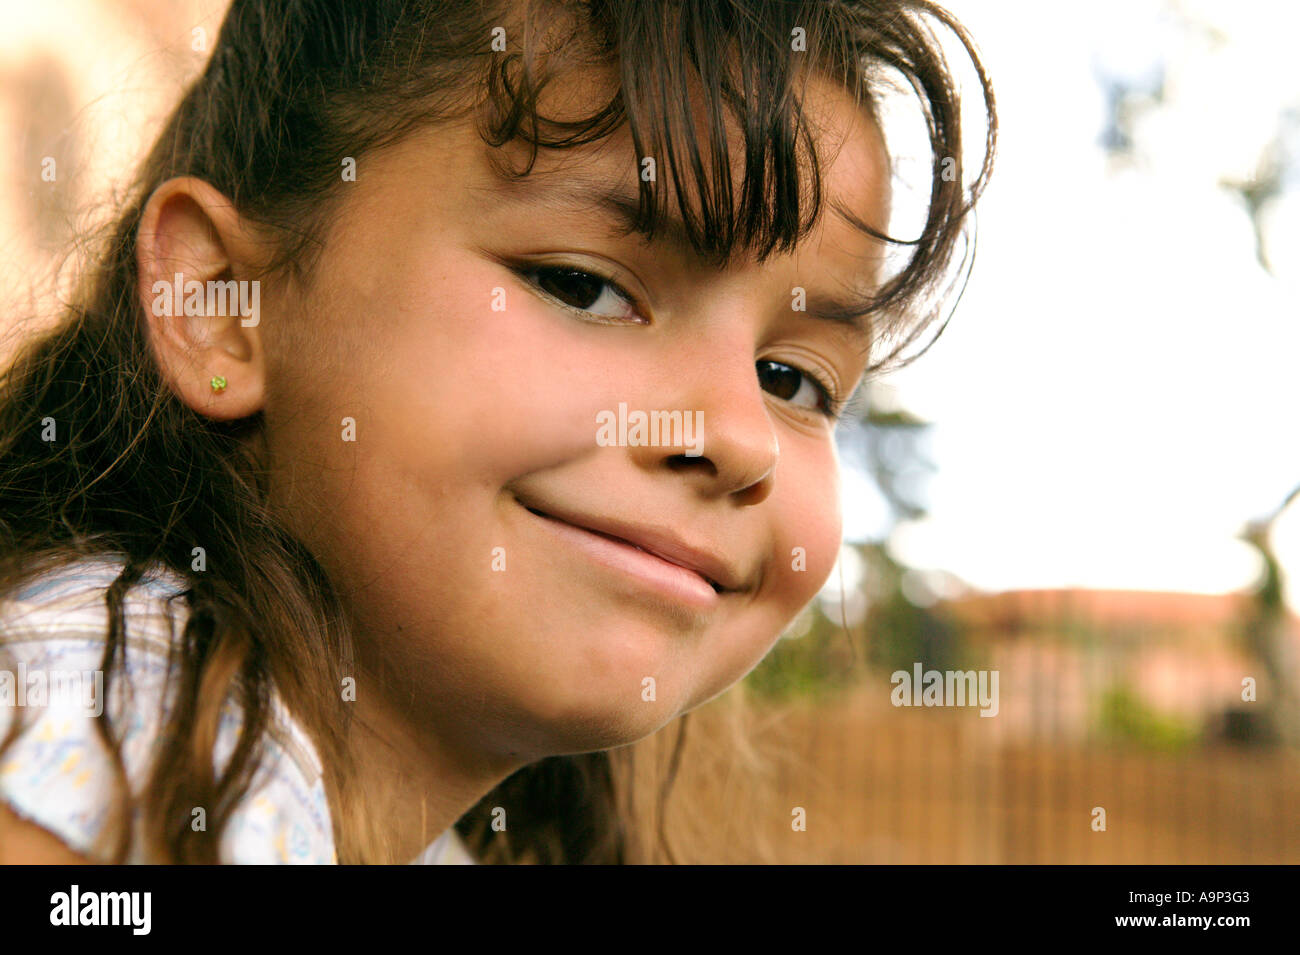 Portrait of smiling young girl Stock Photo